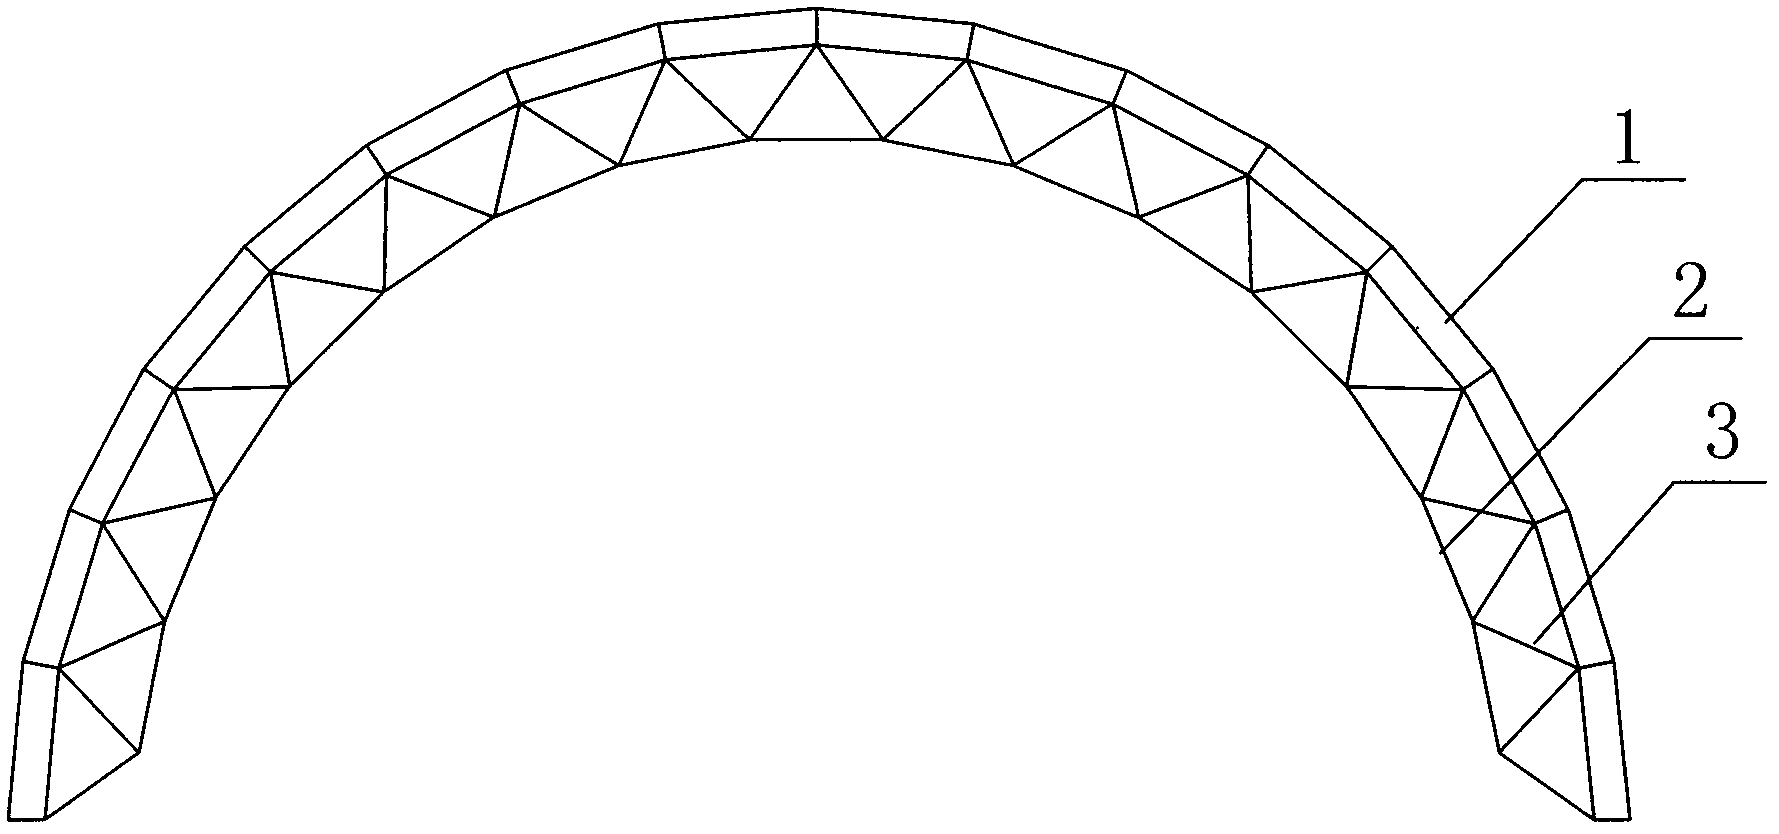 Spatial combined arched shell structure with two layers of cylindrical surfaces